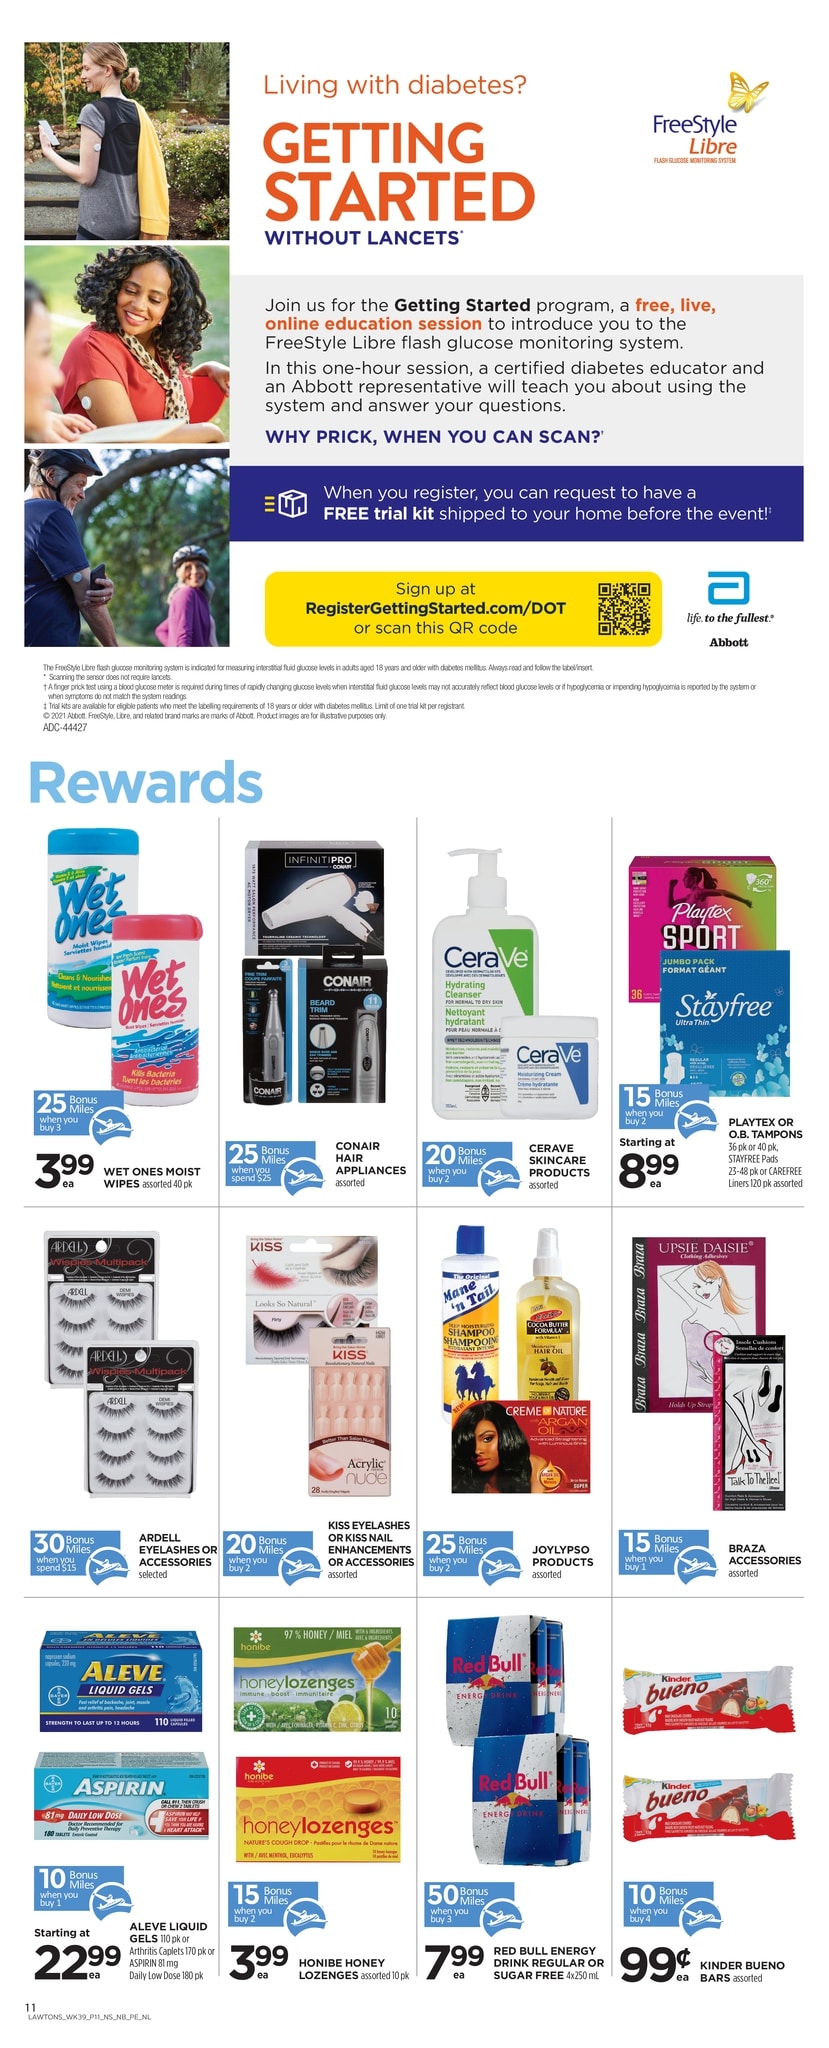 Lawtons Drugs - Weekly Flyer Specials - Page 10